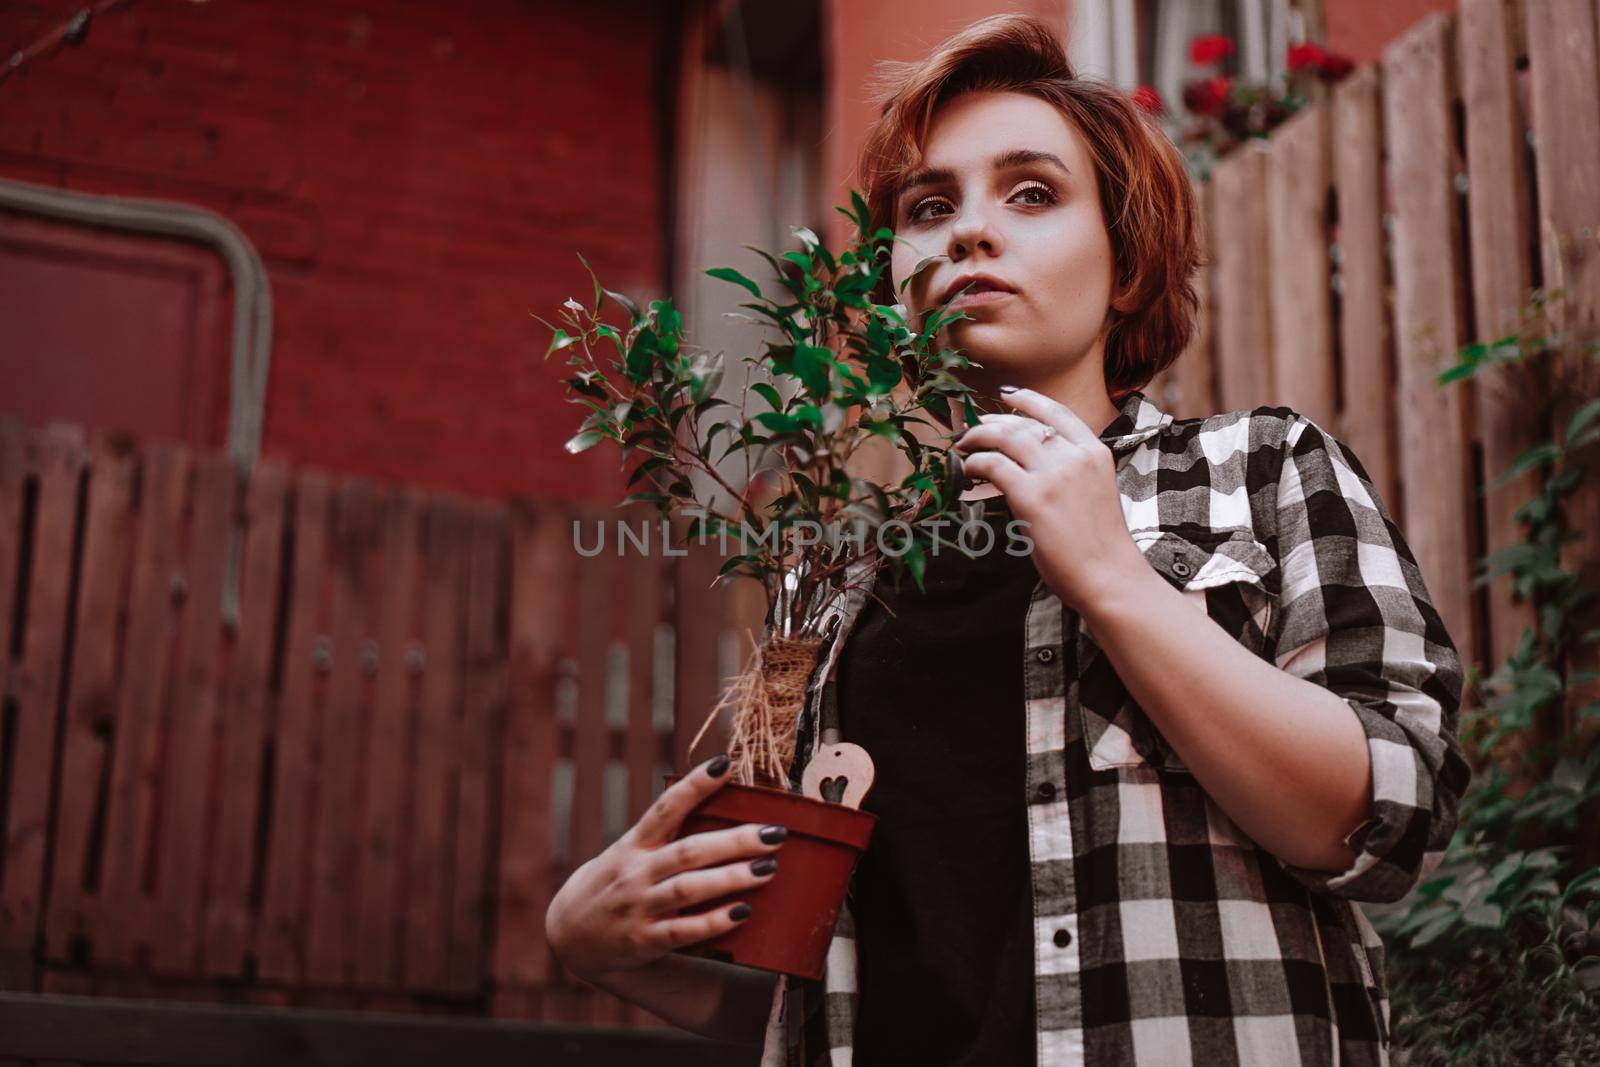 Beautiful young woman with short red hair in a plaid shirt holding a flower in a pot in the backyard